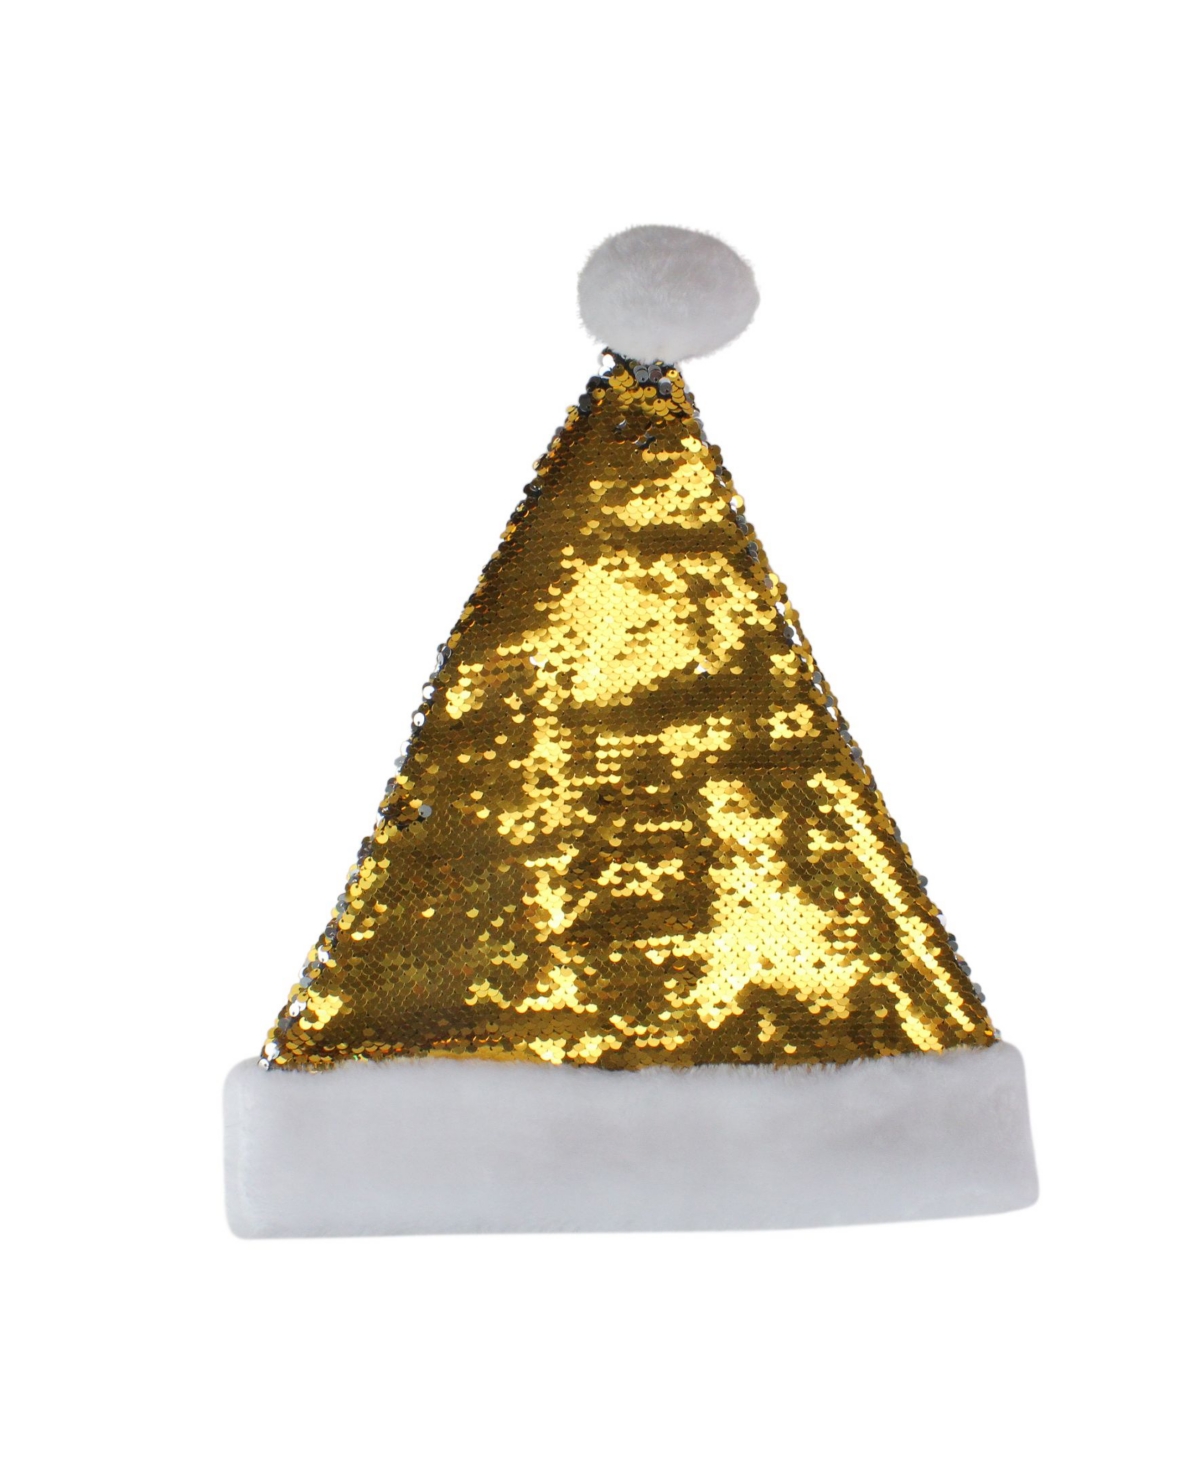 Reversible Sequined Christmas Santa Hat with Faux Fur Cuff - Gold